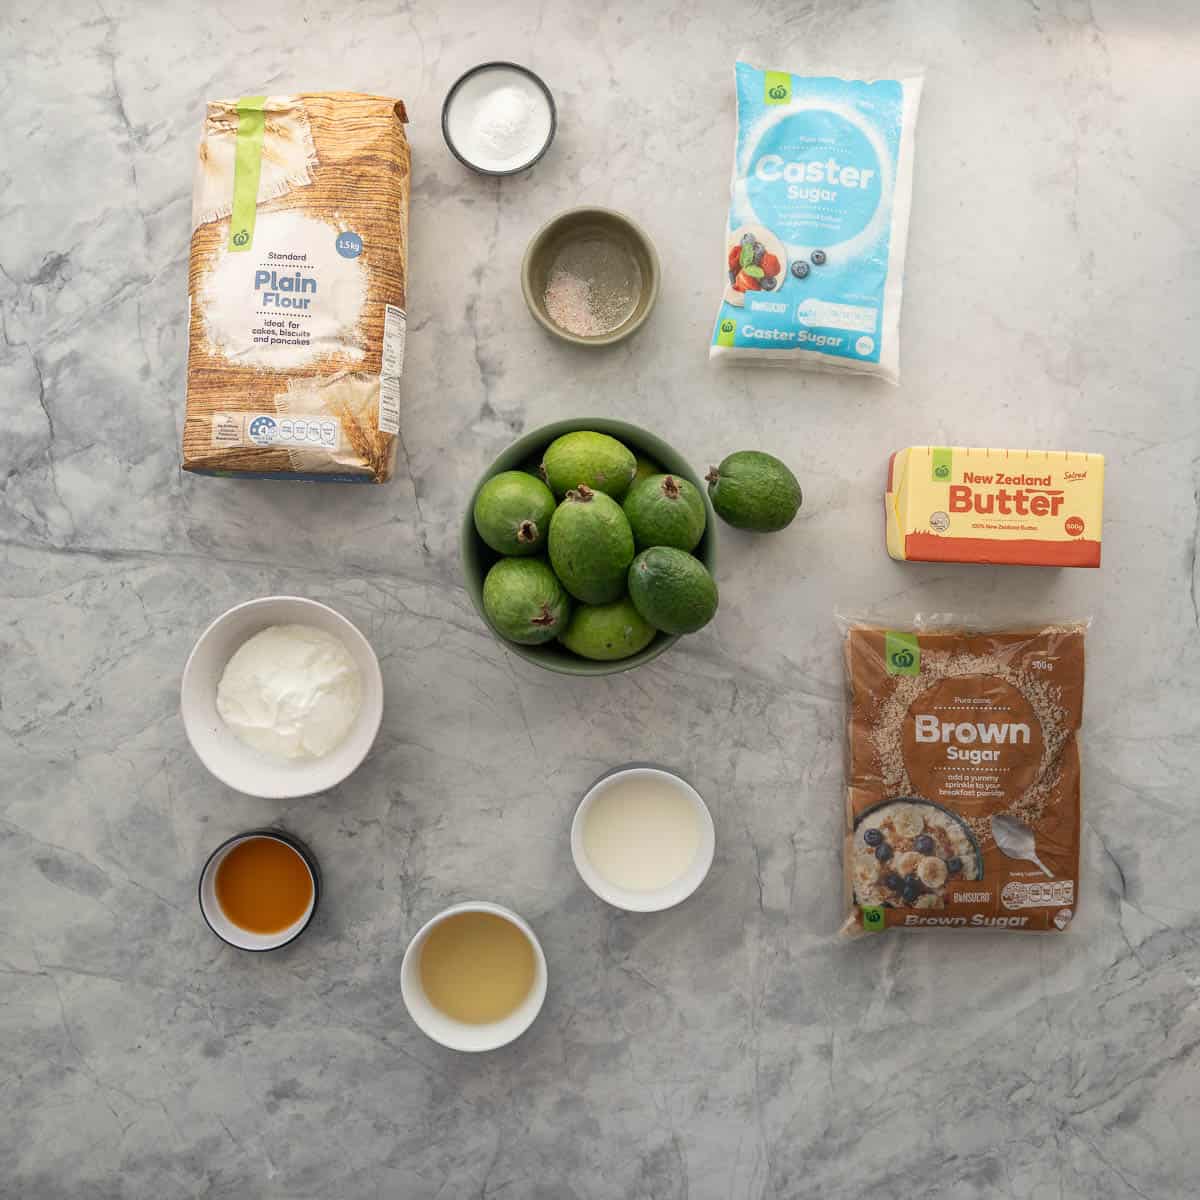 All the ingredients laid out on the bench to make a feijoa cake.